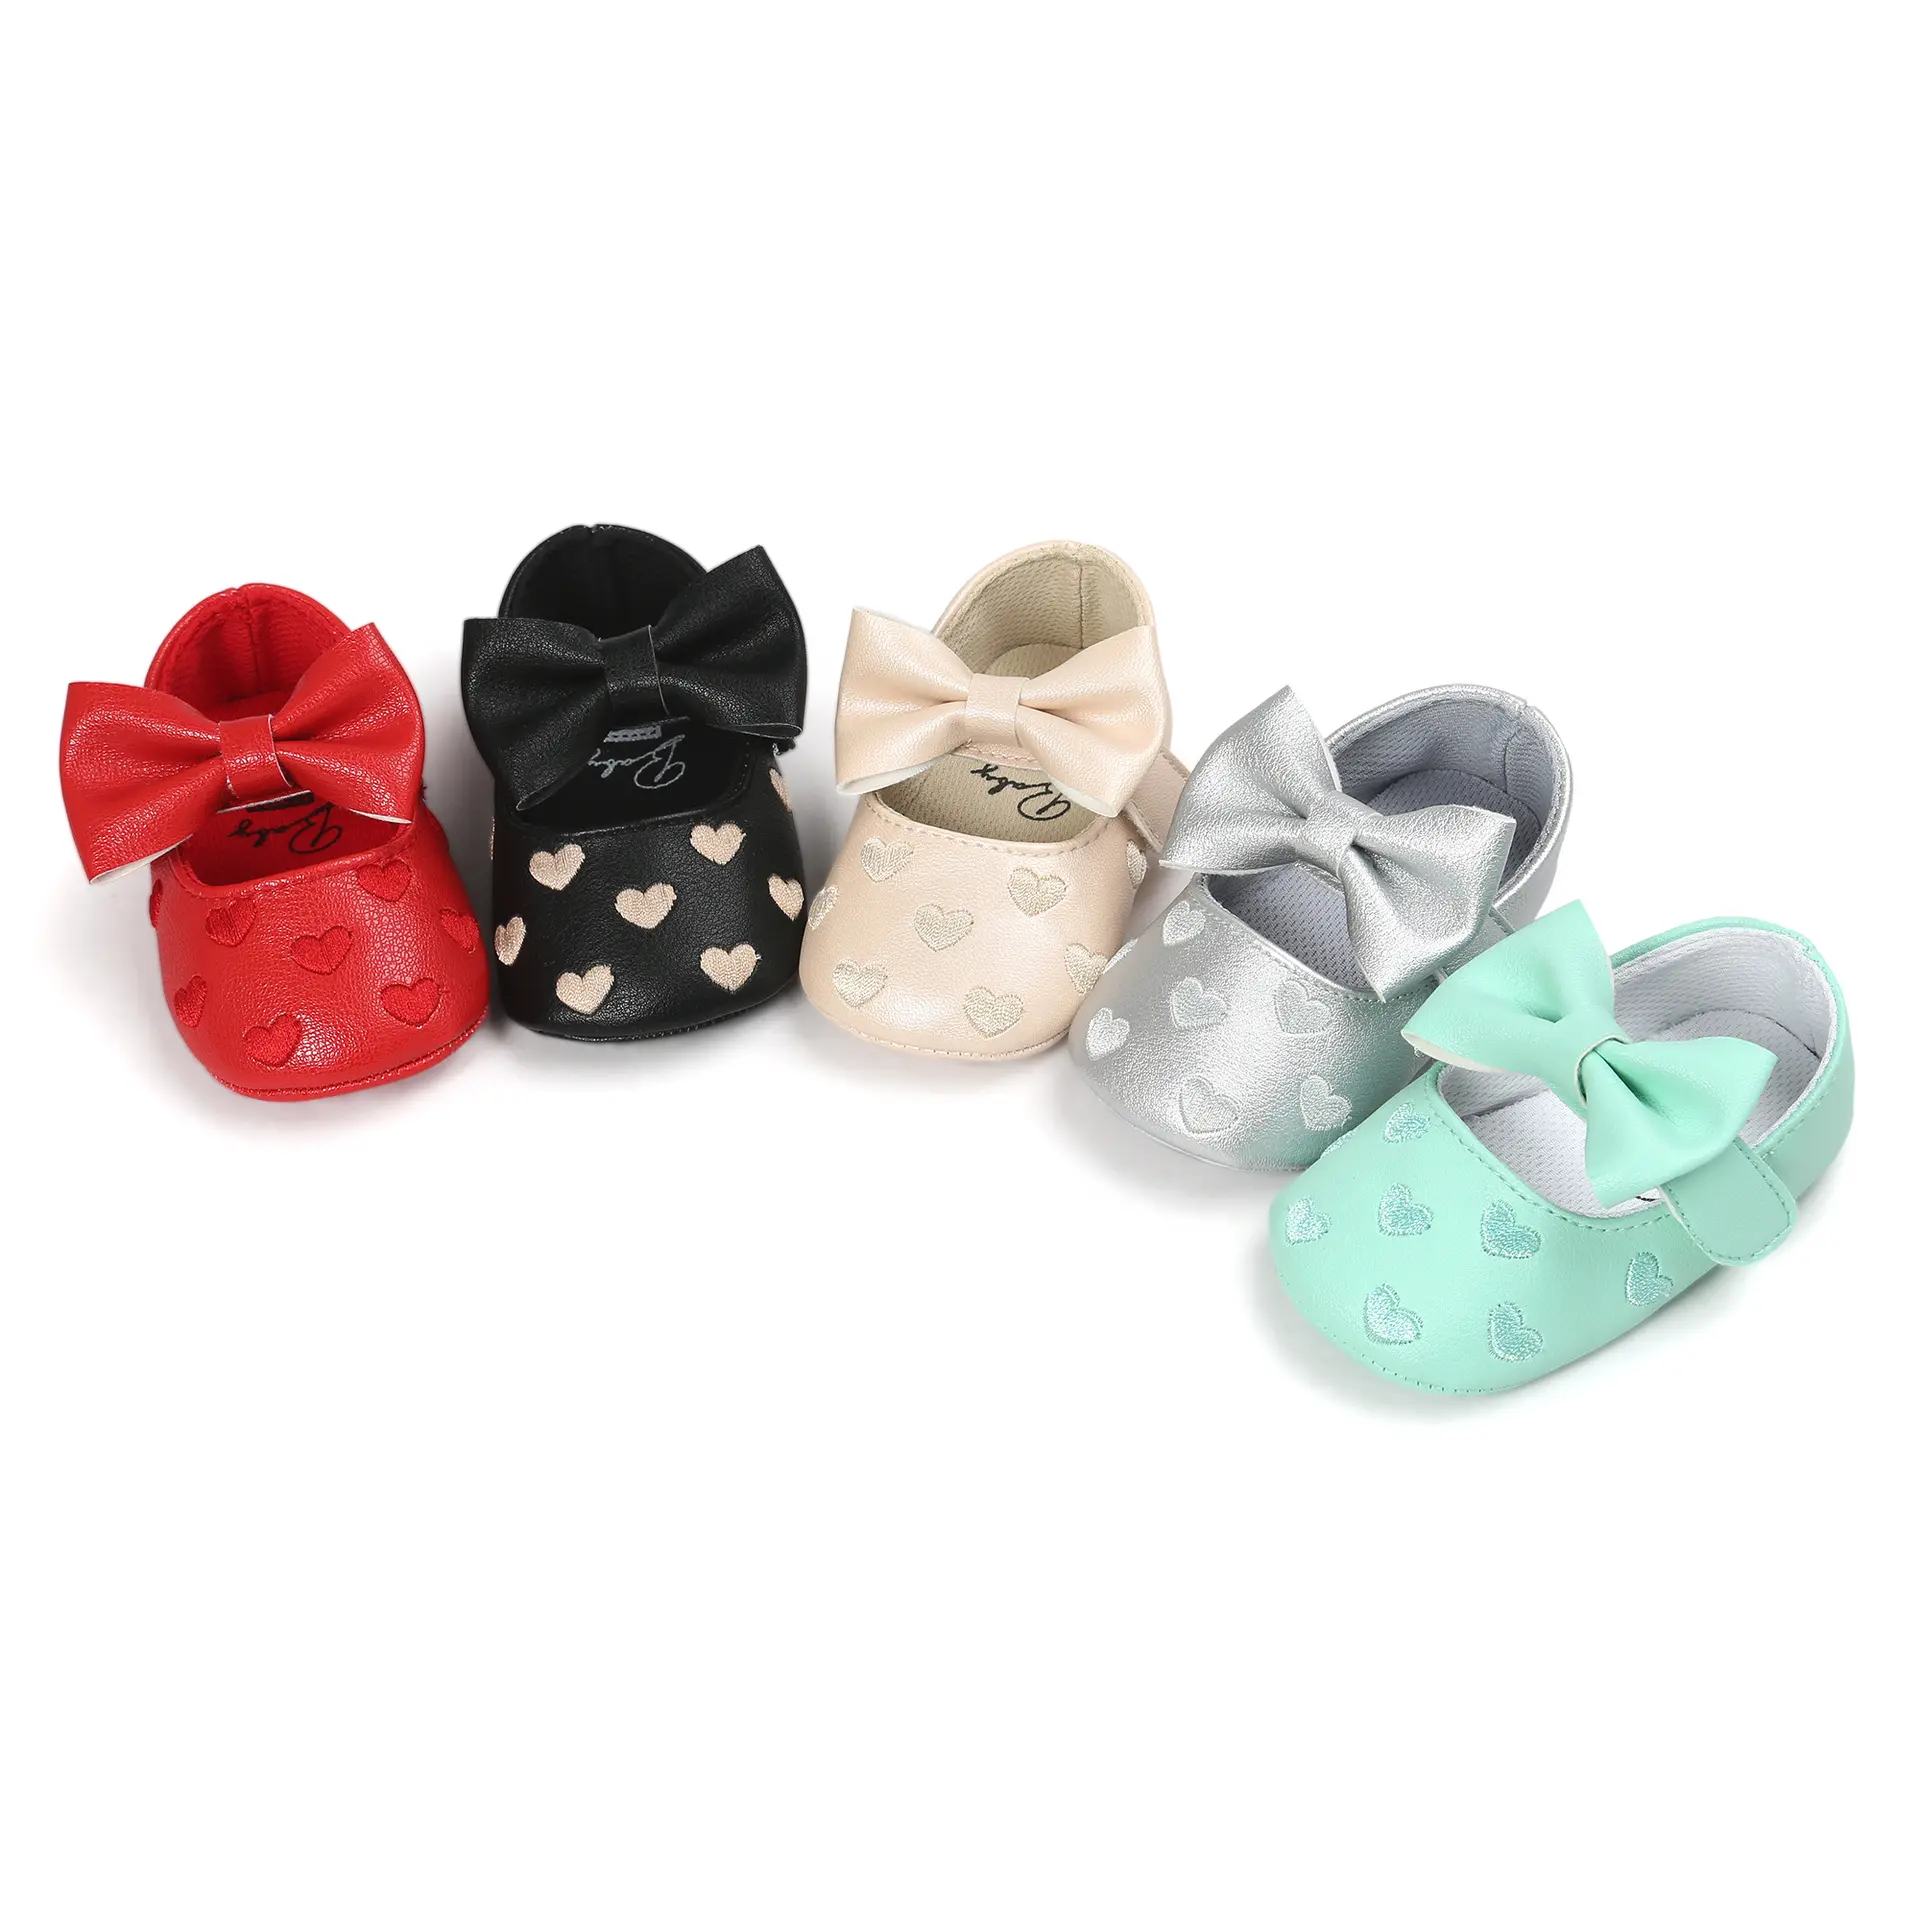 Child Toddler Shoes Baby Girl Shoes First Walkers Lovely Princess Non slip Infant Soft Newborn antiskid baby shoes M0352